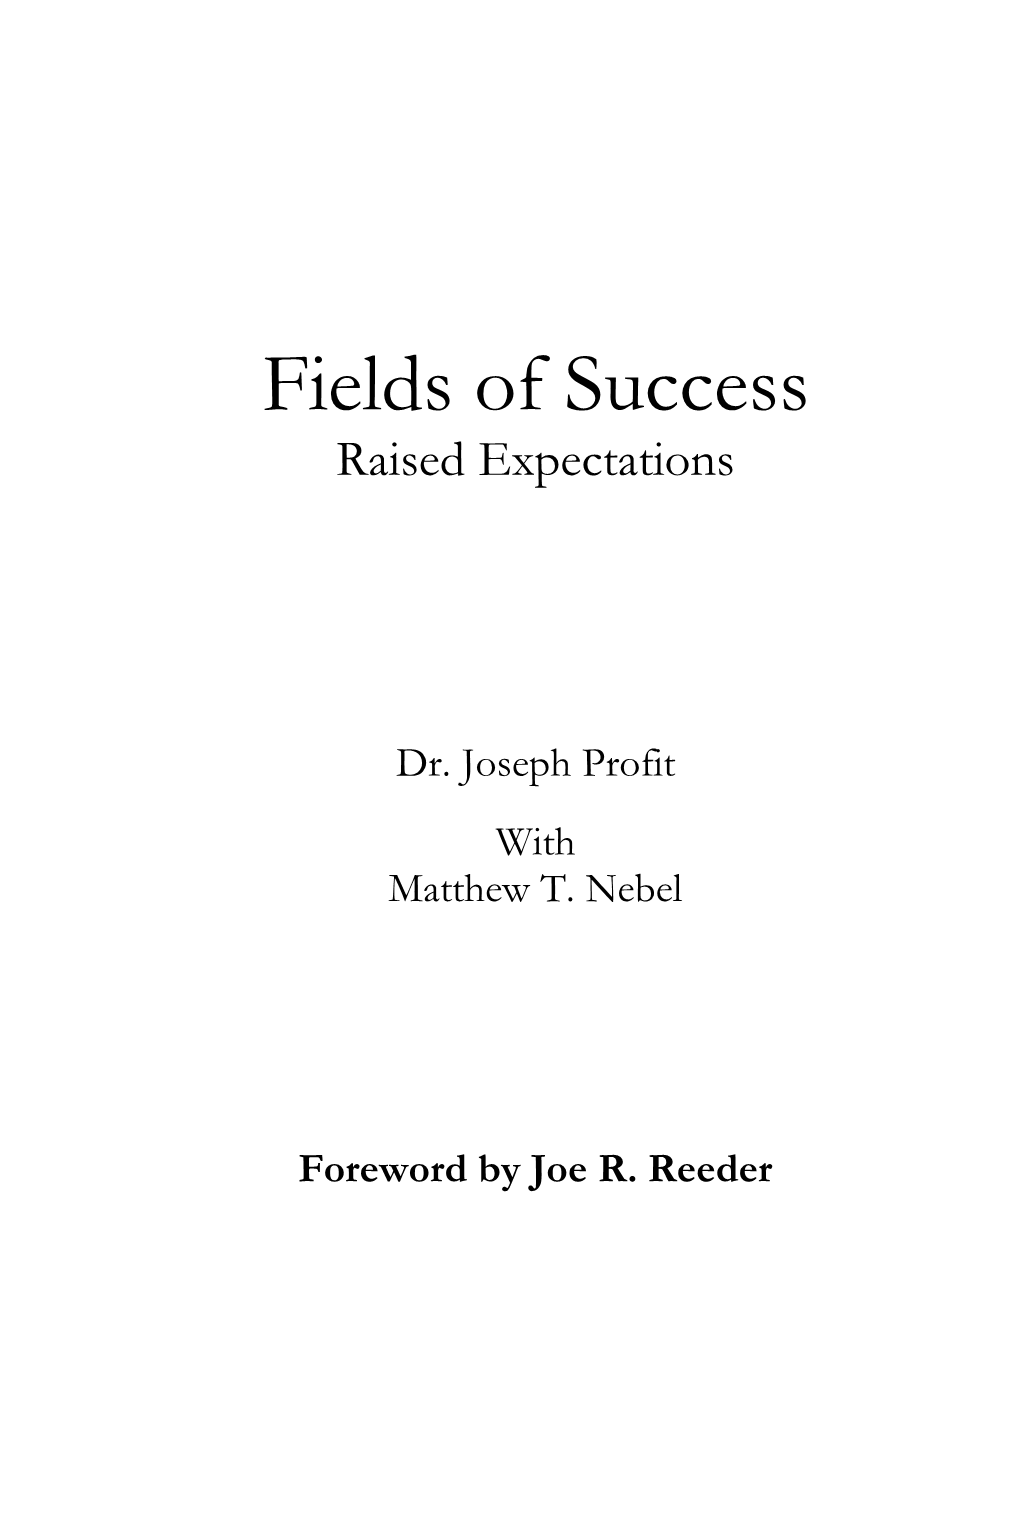 Fields of Success Raised Expectations